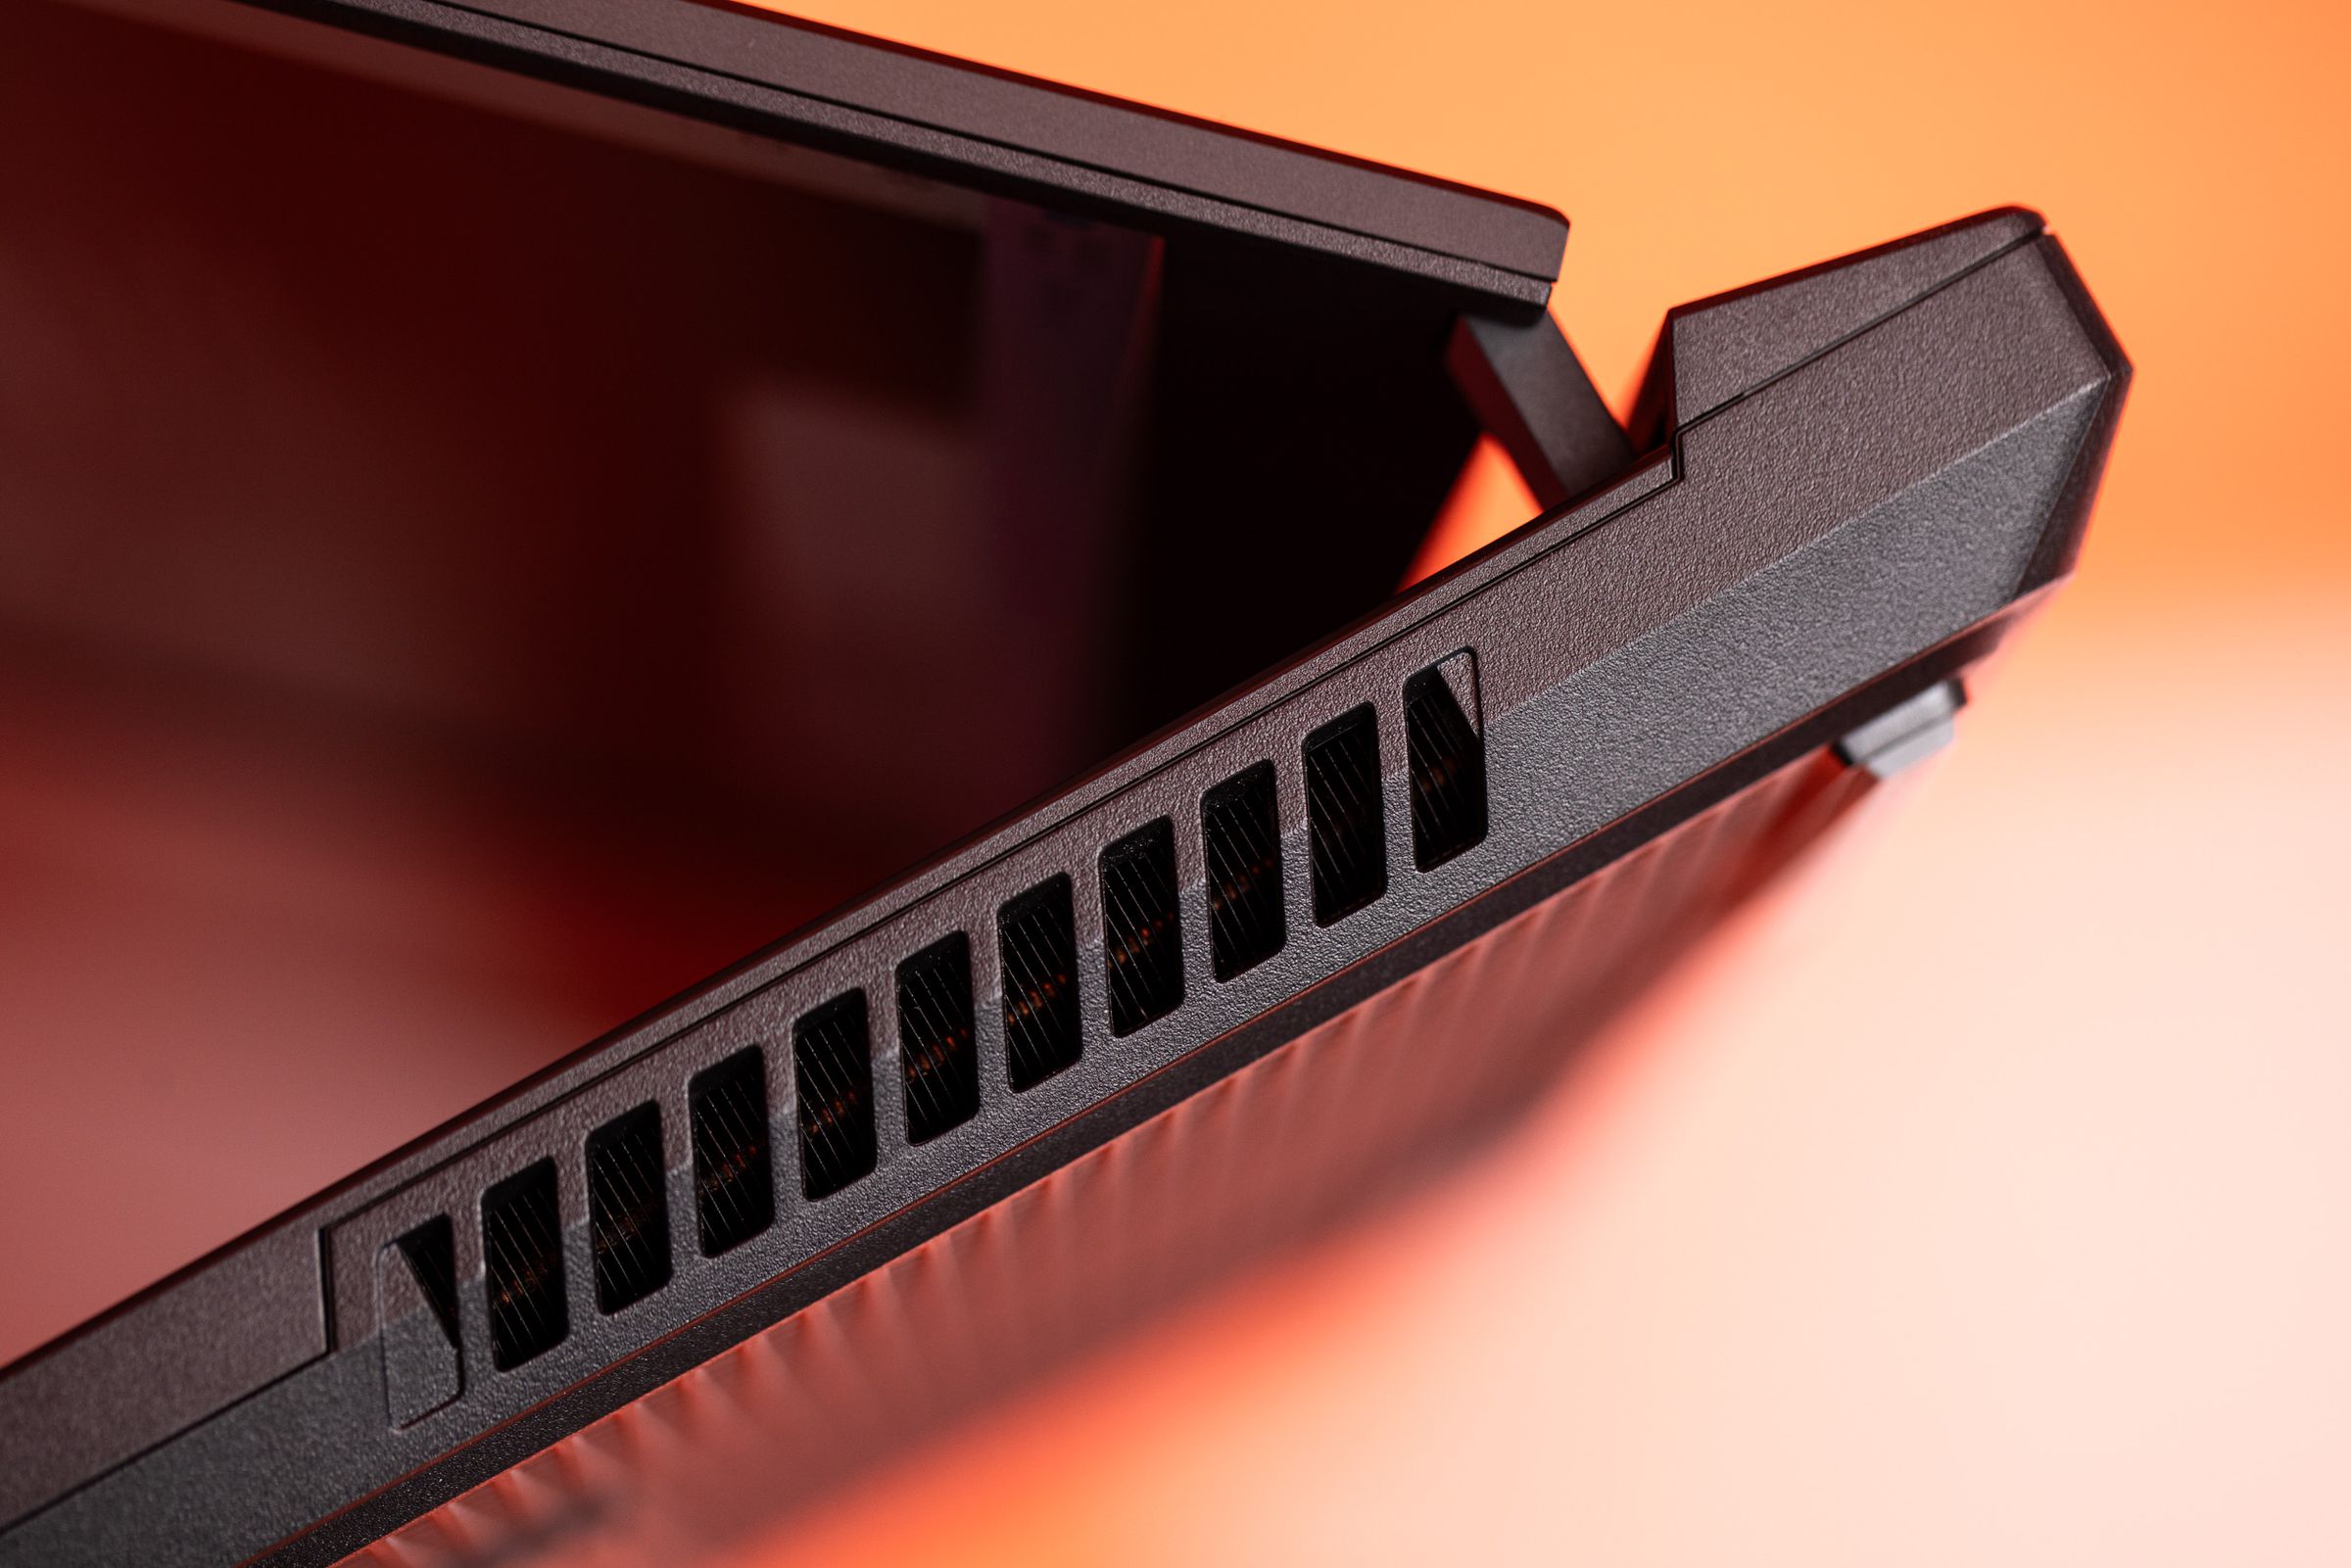 The vent on the right side of the Asus ROG Strix Scar 17.